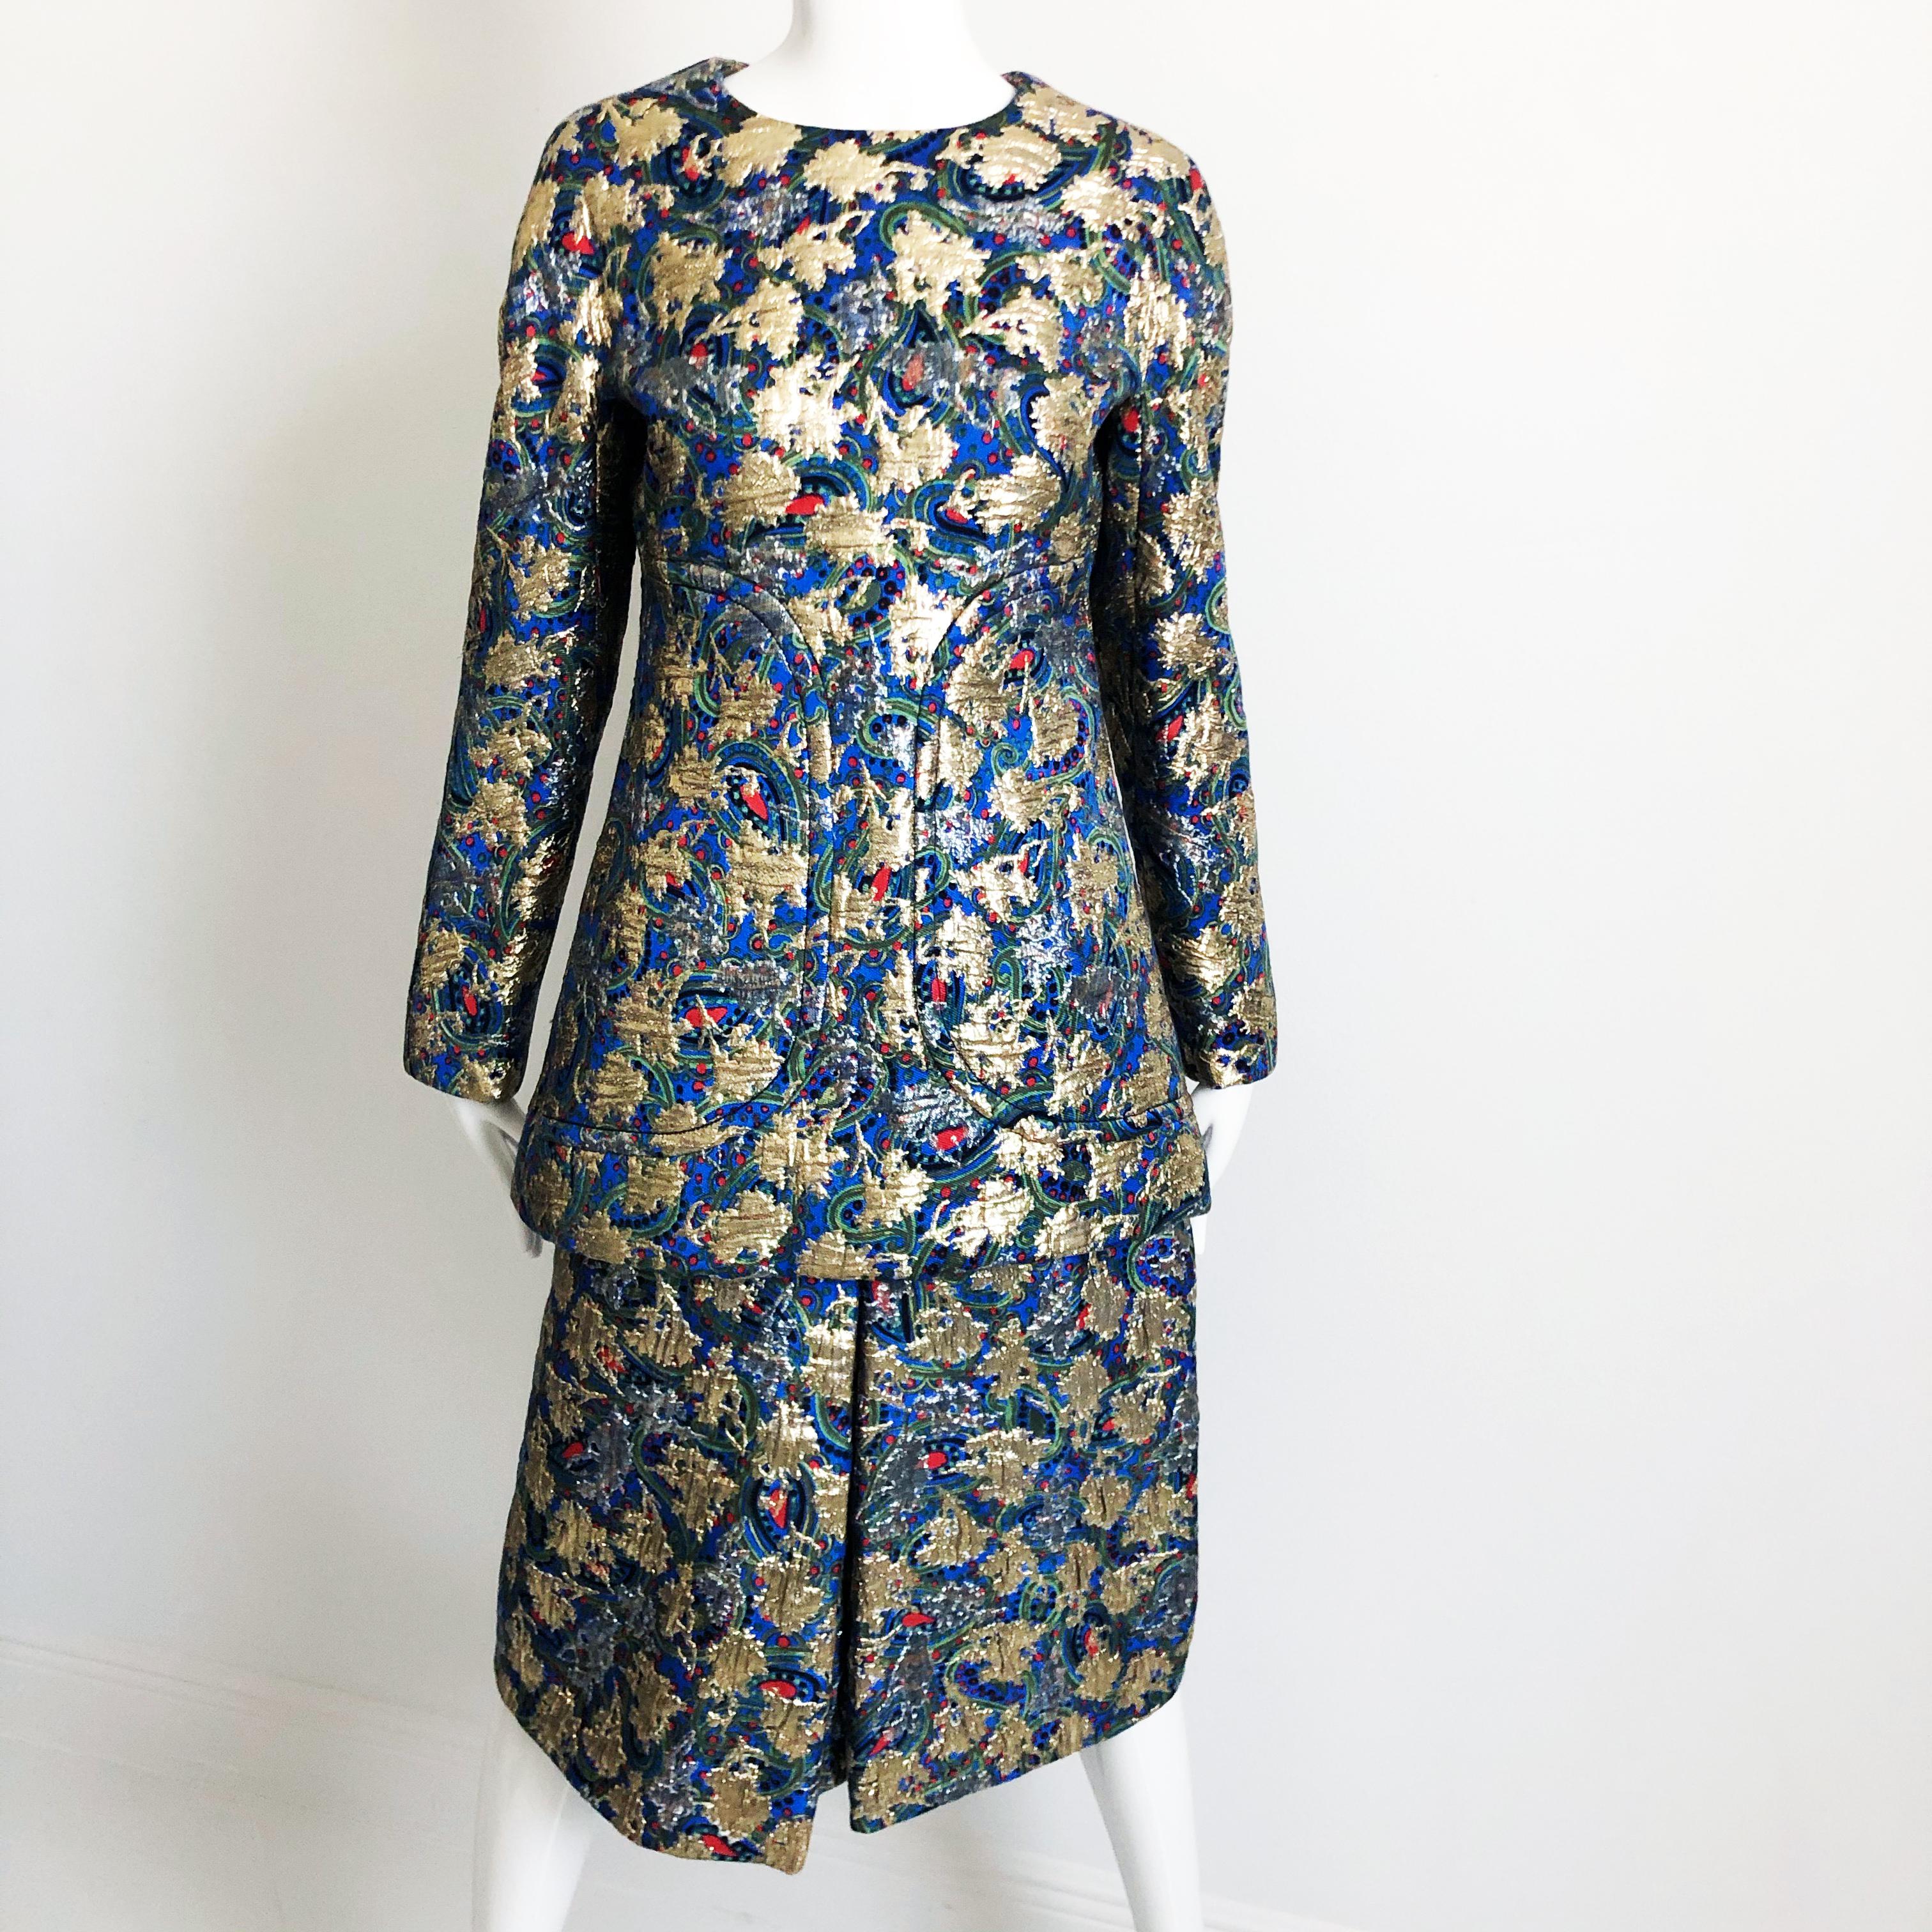 Galanos Metallic Brocade Suit 3pc Top, Long Vest and Skirt Vintage 60s Retro  For Sale 3